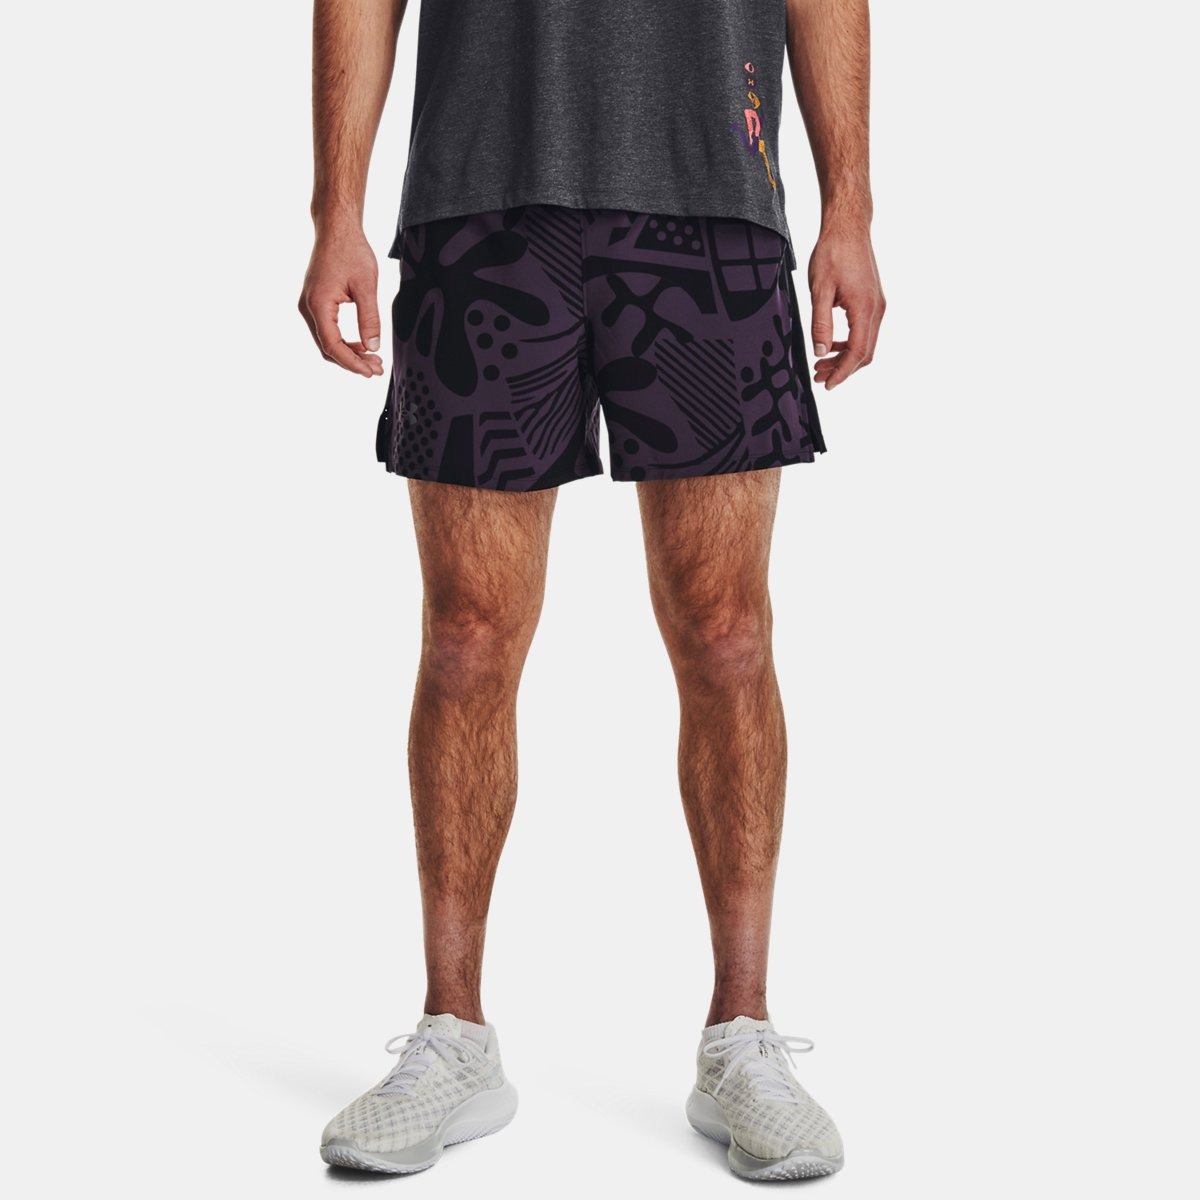 Gent Black Shorts by Under Armour GOOFASH